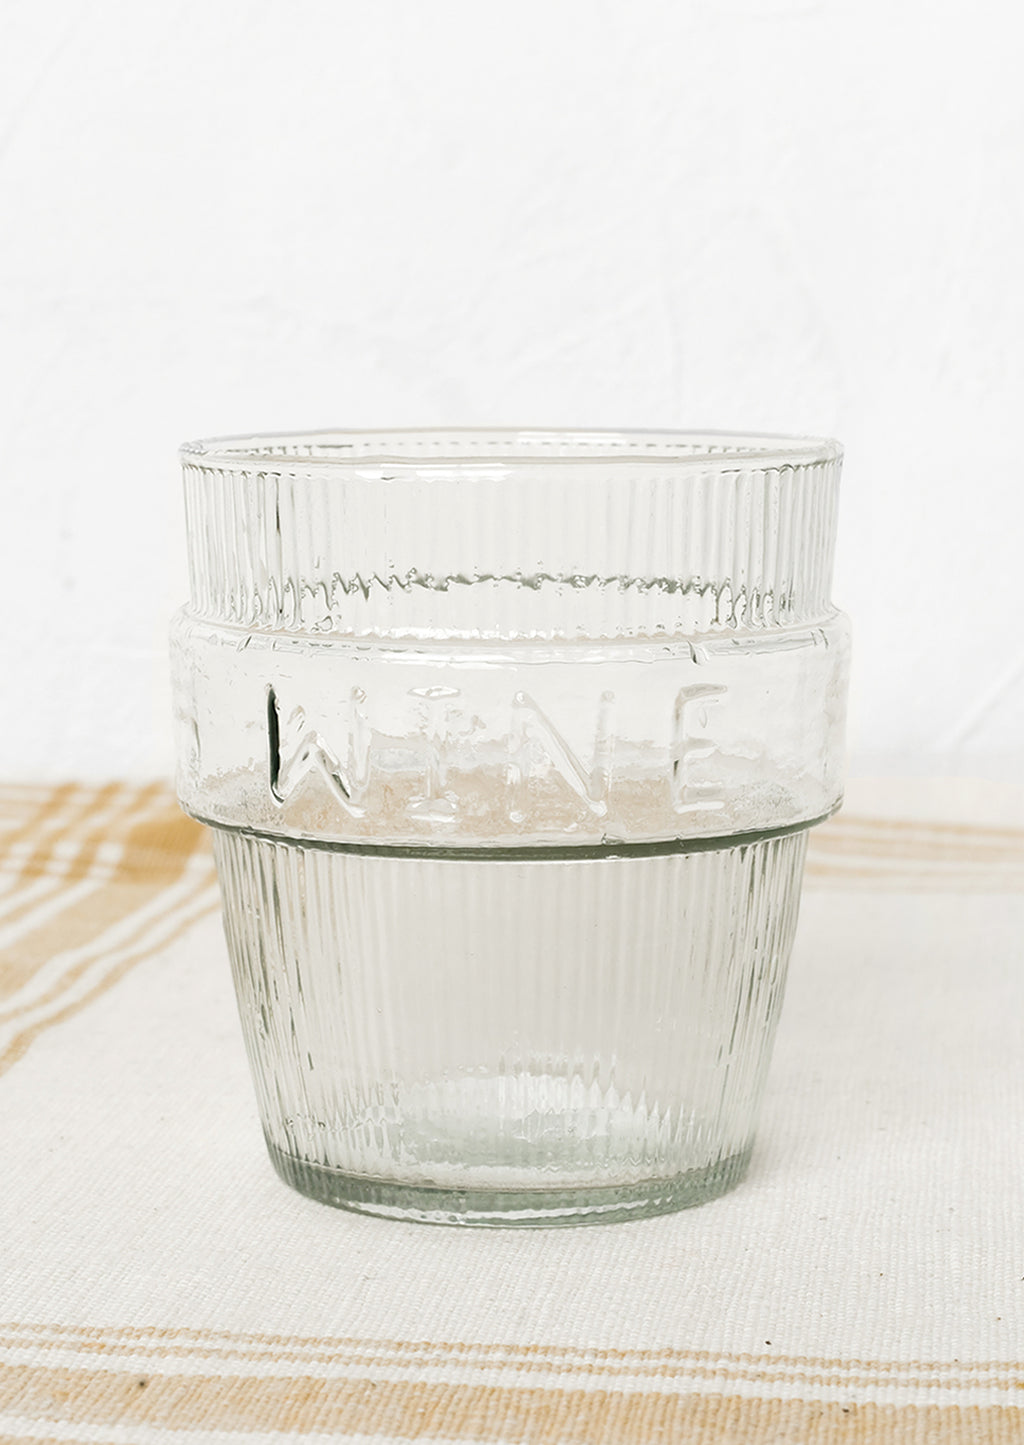 1: A short ribbed clear glass cup labeled "wine".